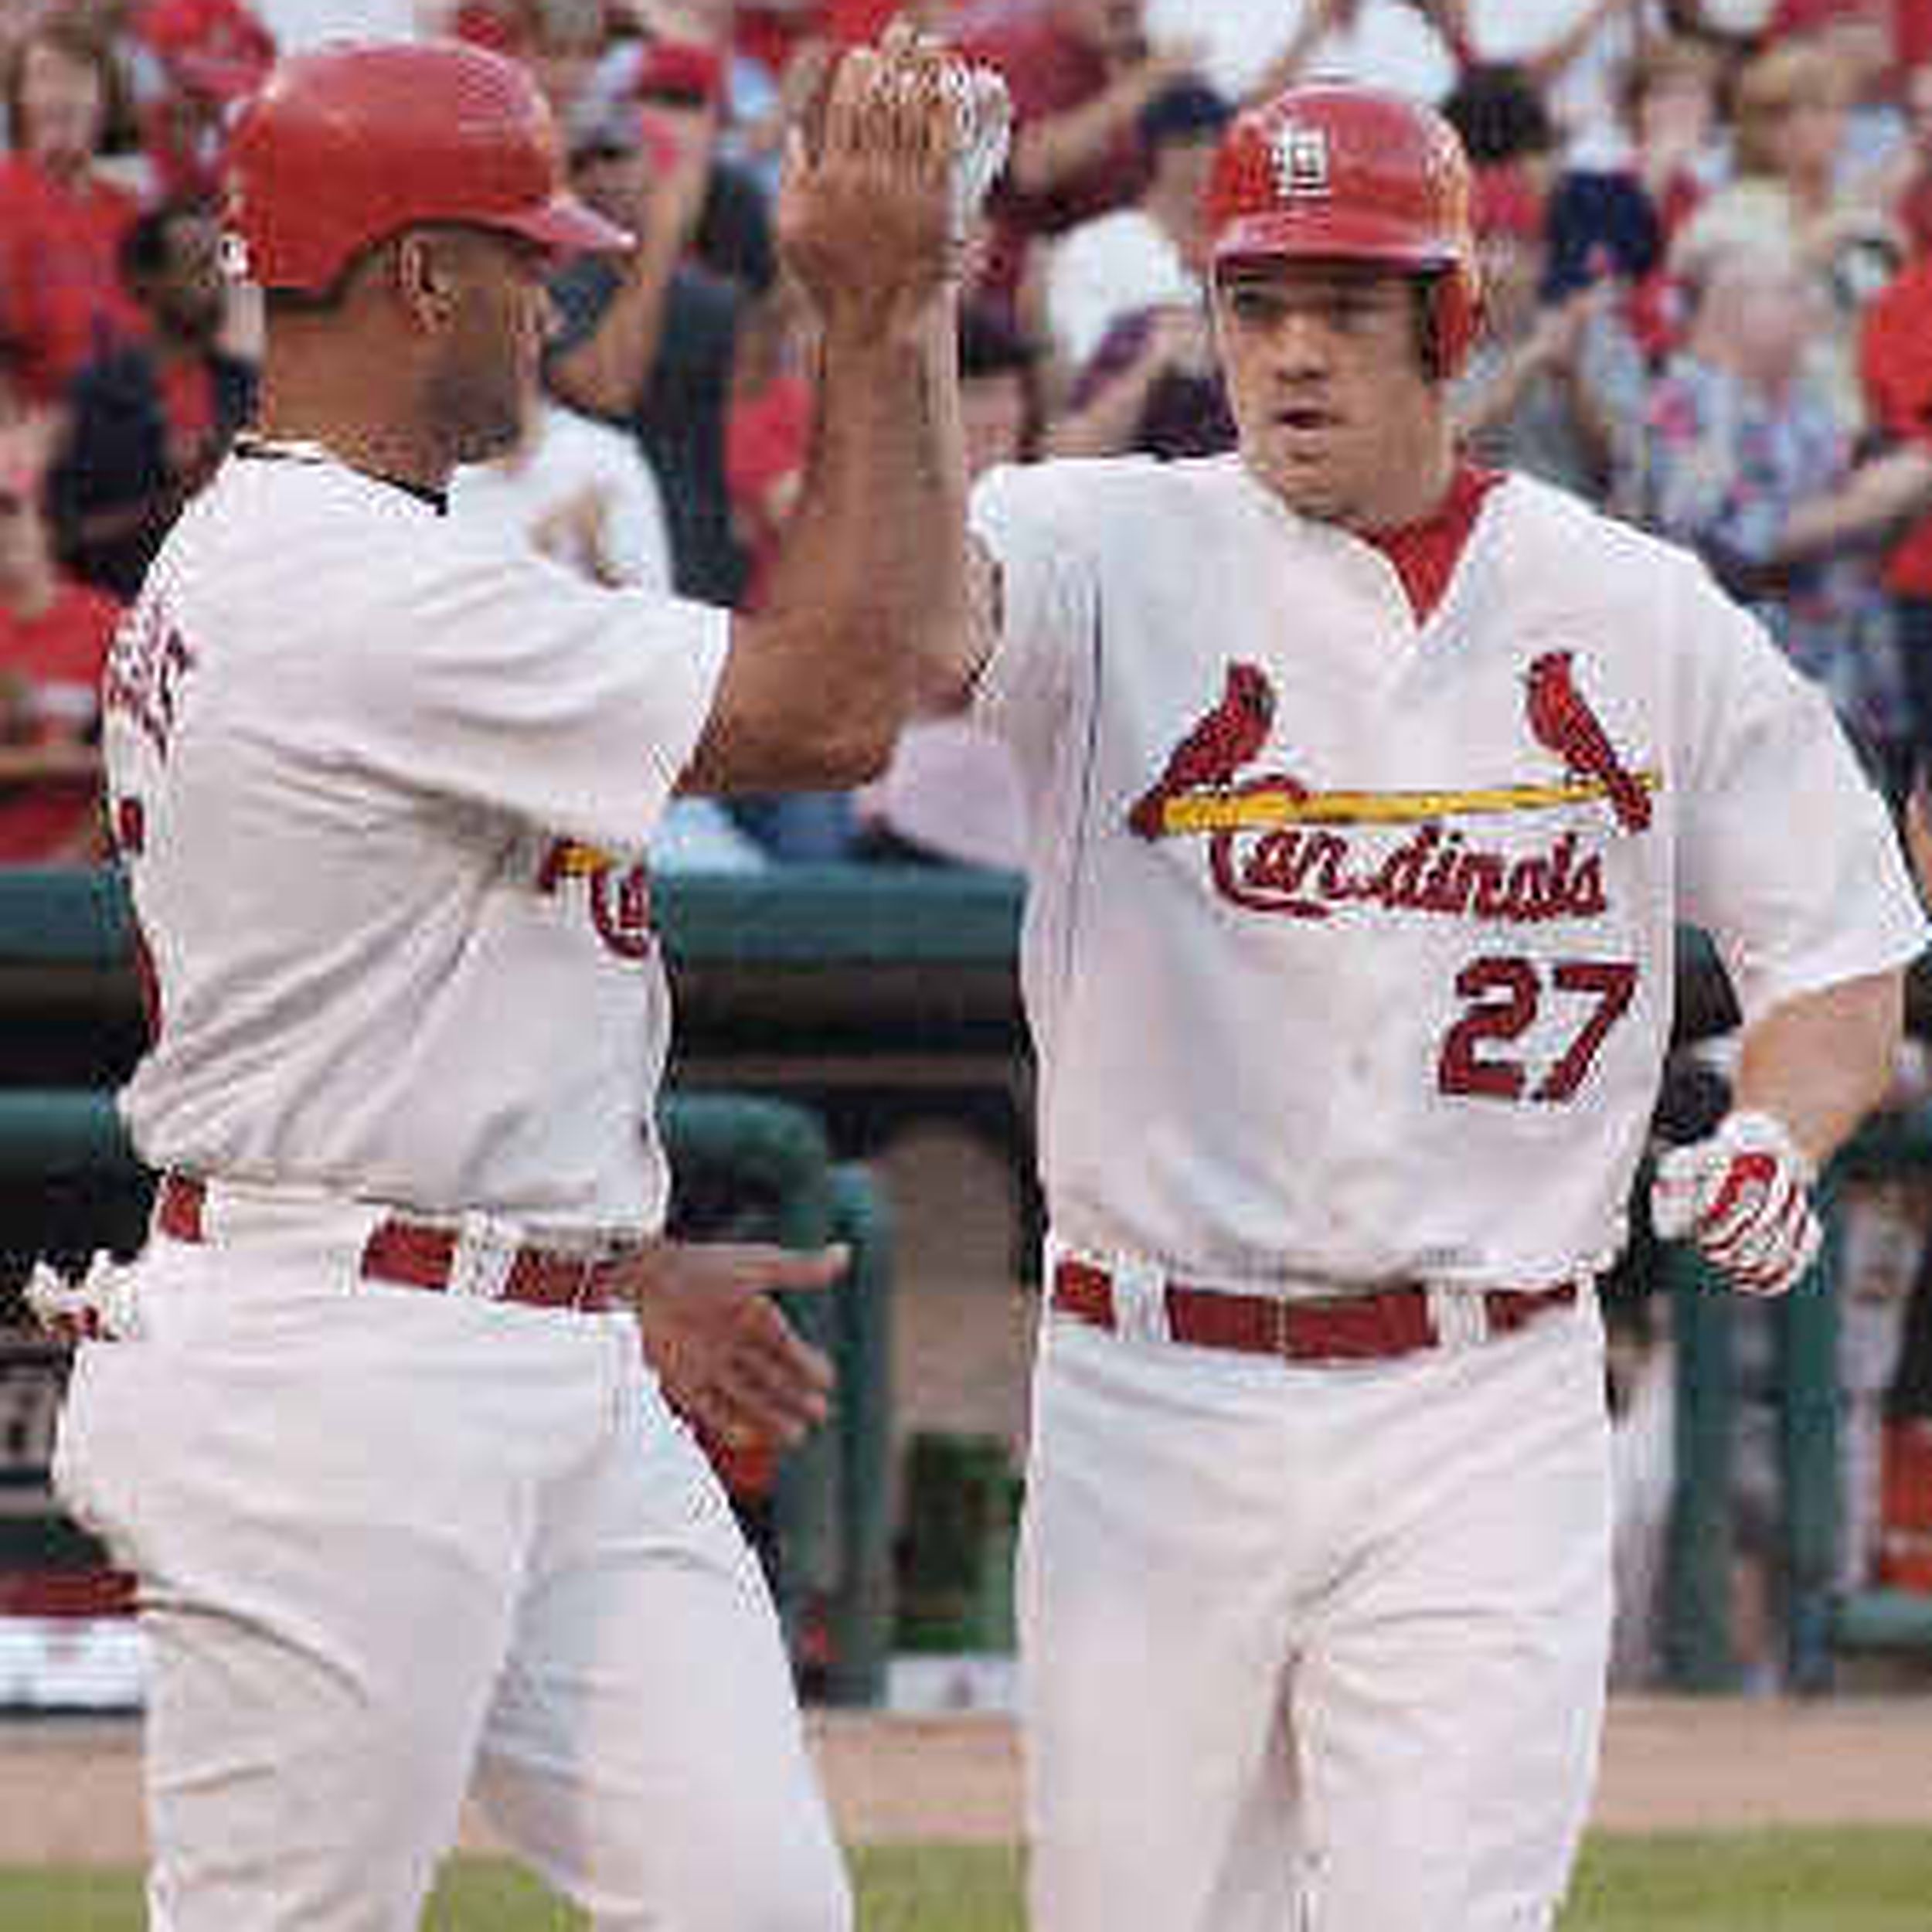 Baseball roundup: Scott Rolen elected to Hall of Fame